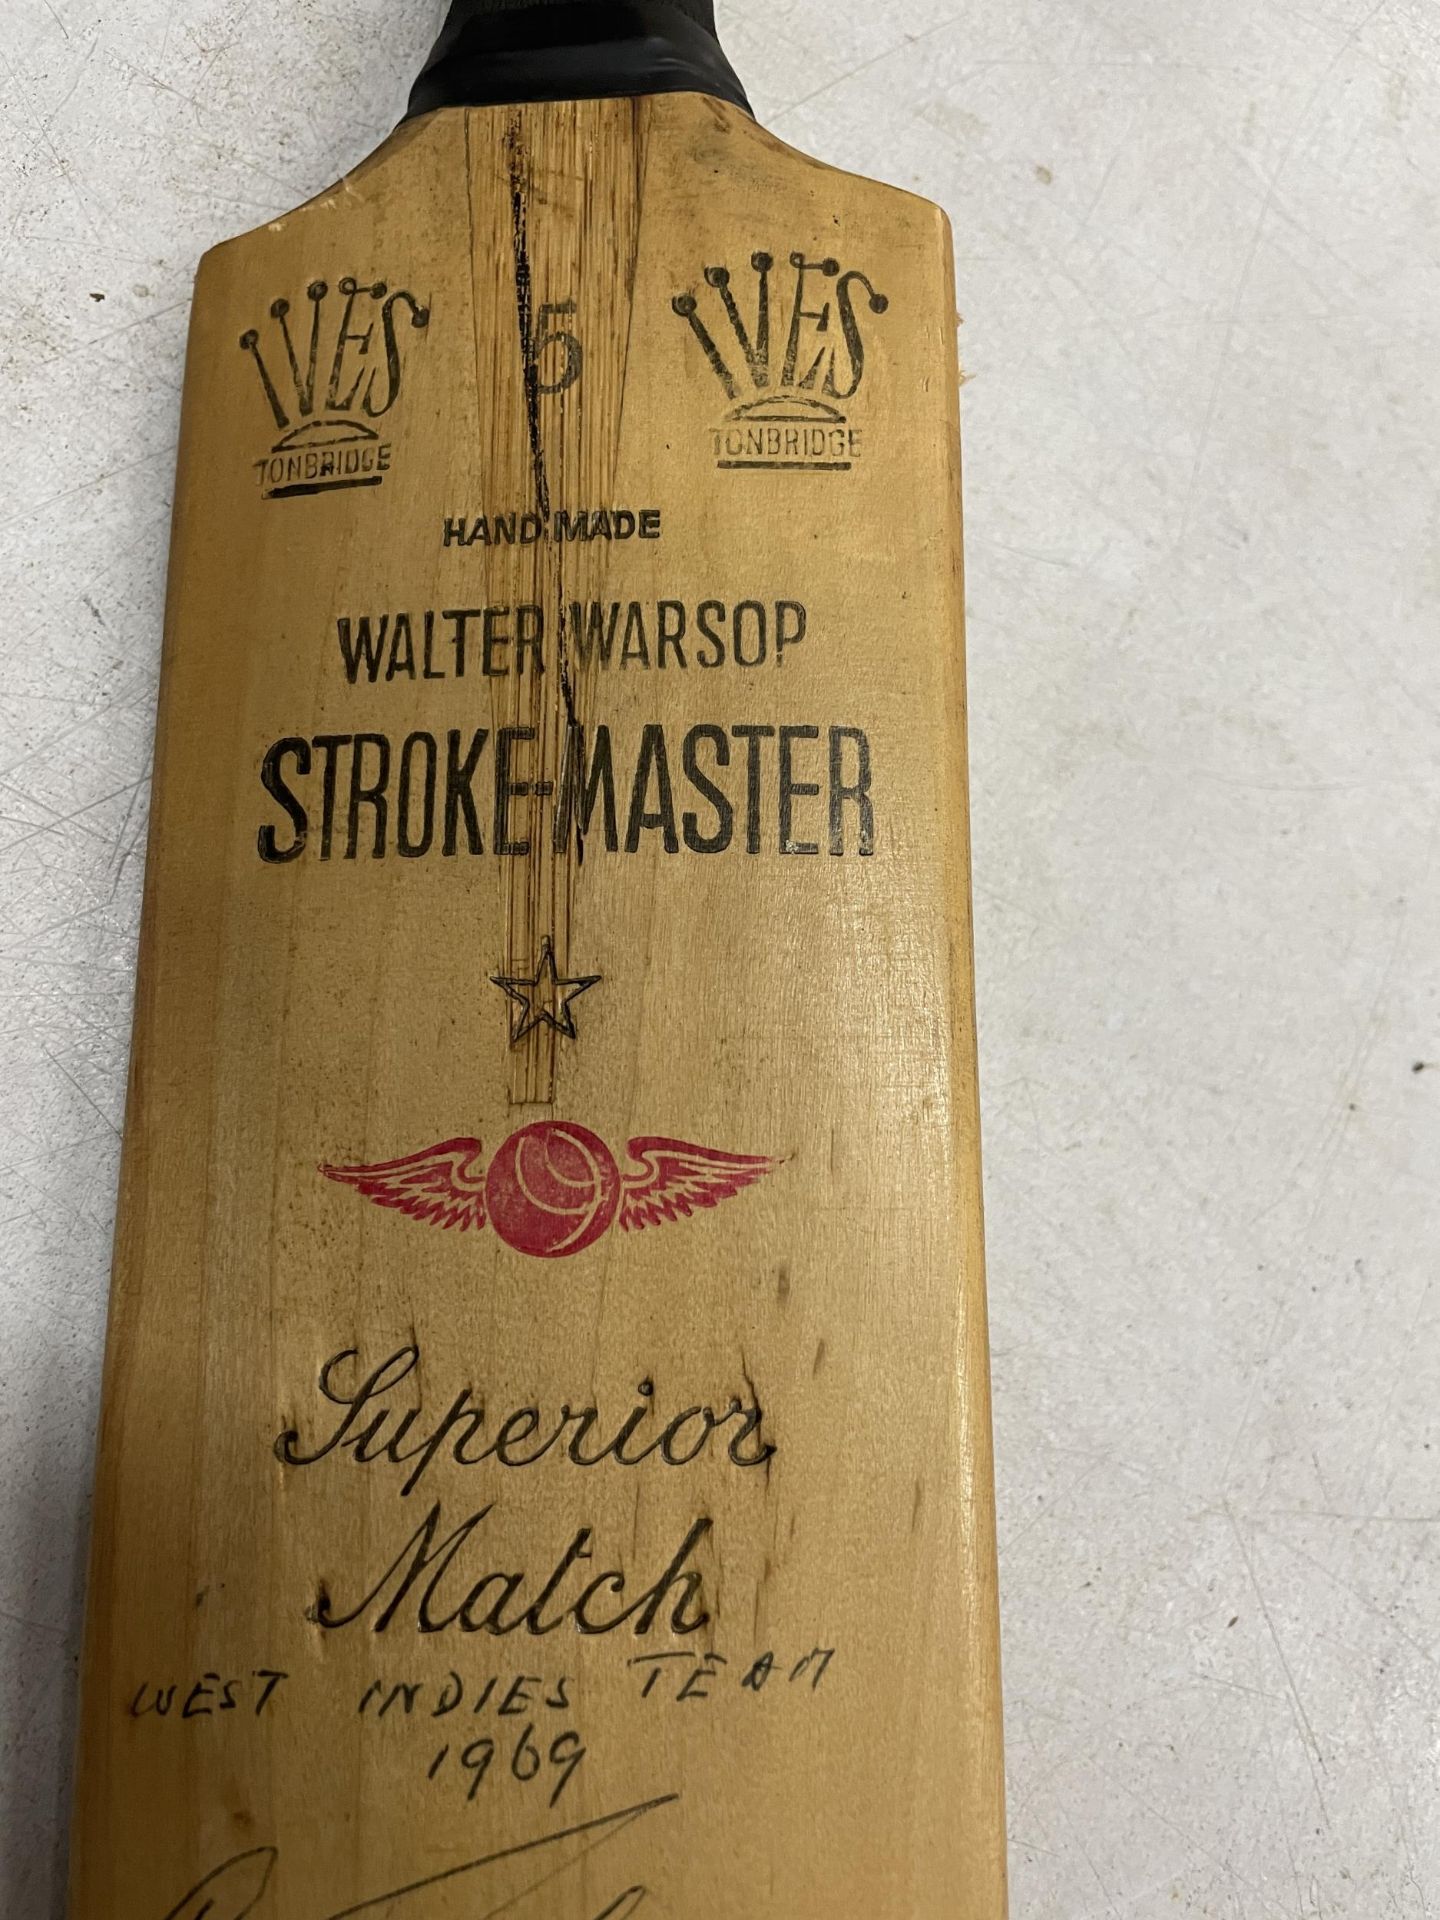 A WALTER WARSOP STROKE MASTER CRICKET BAT SIGNED BY THE WEST INDIES TEAM 1969 - Image 4 of 5